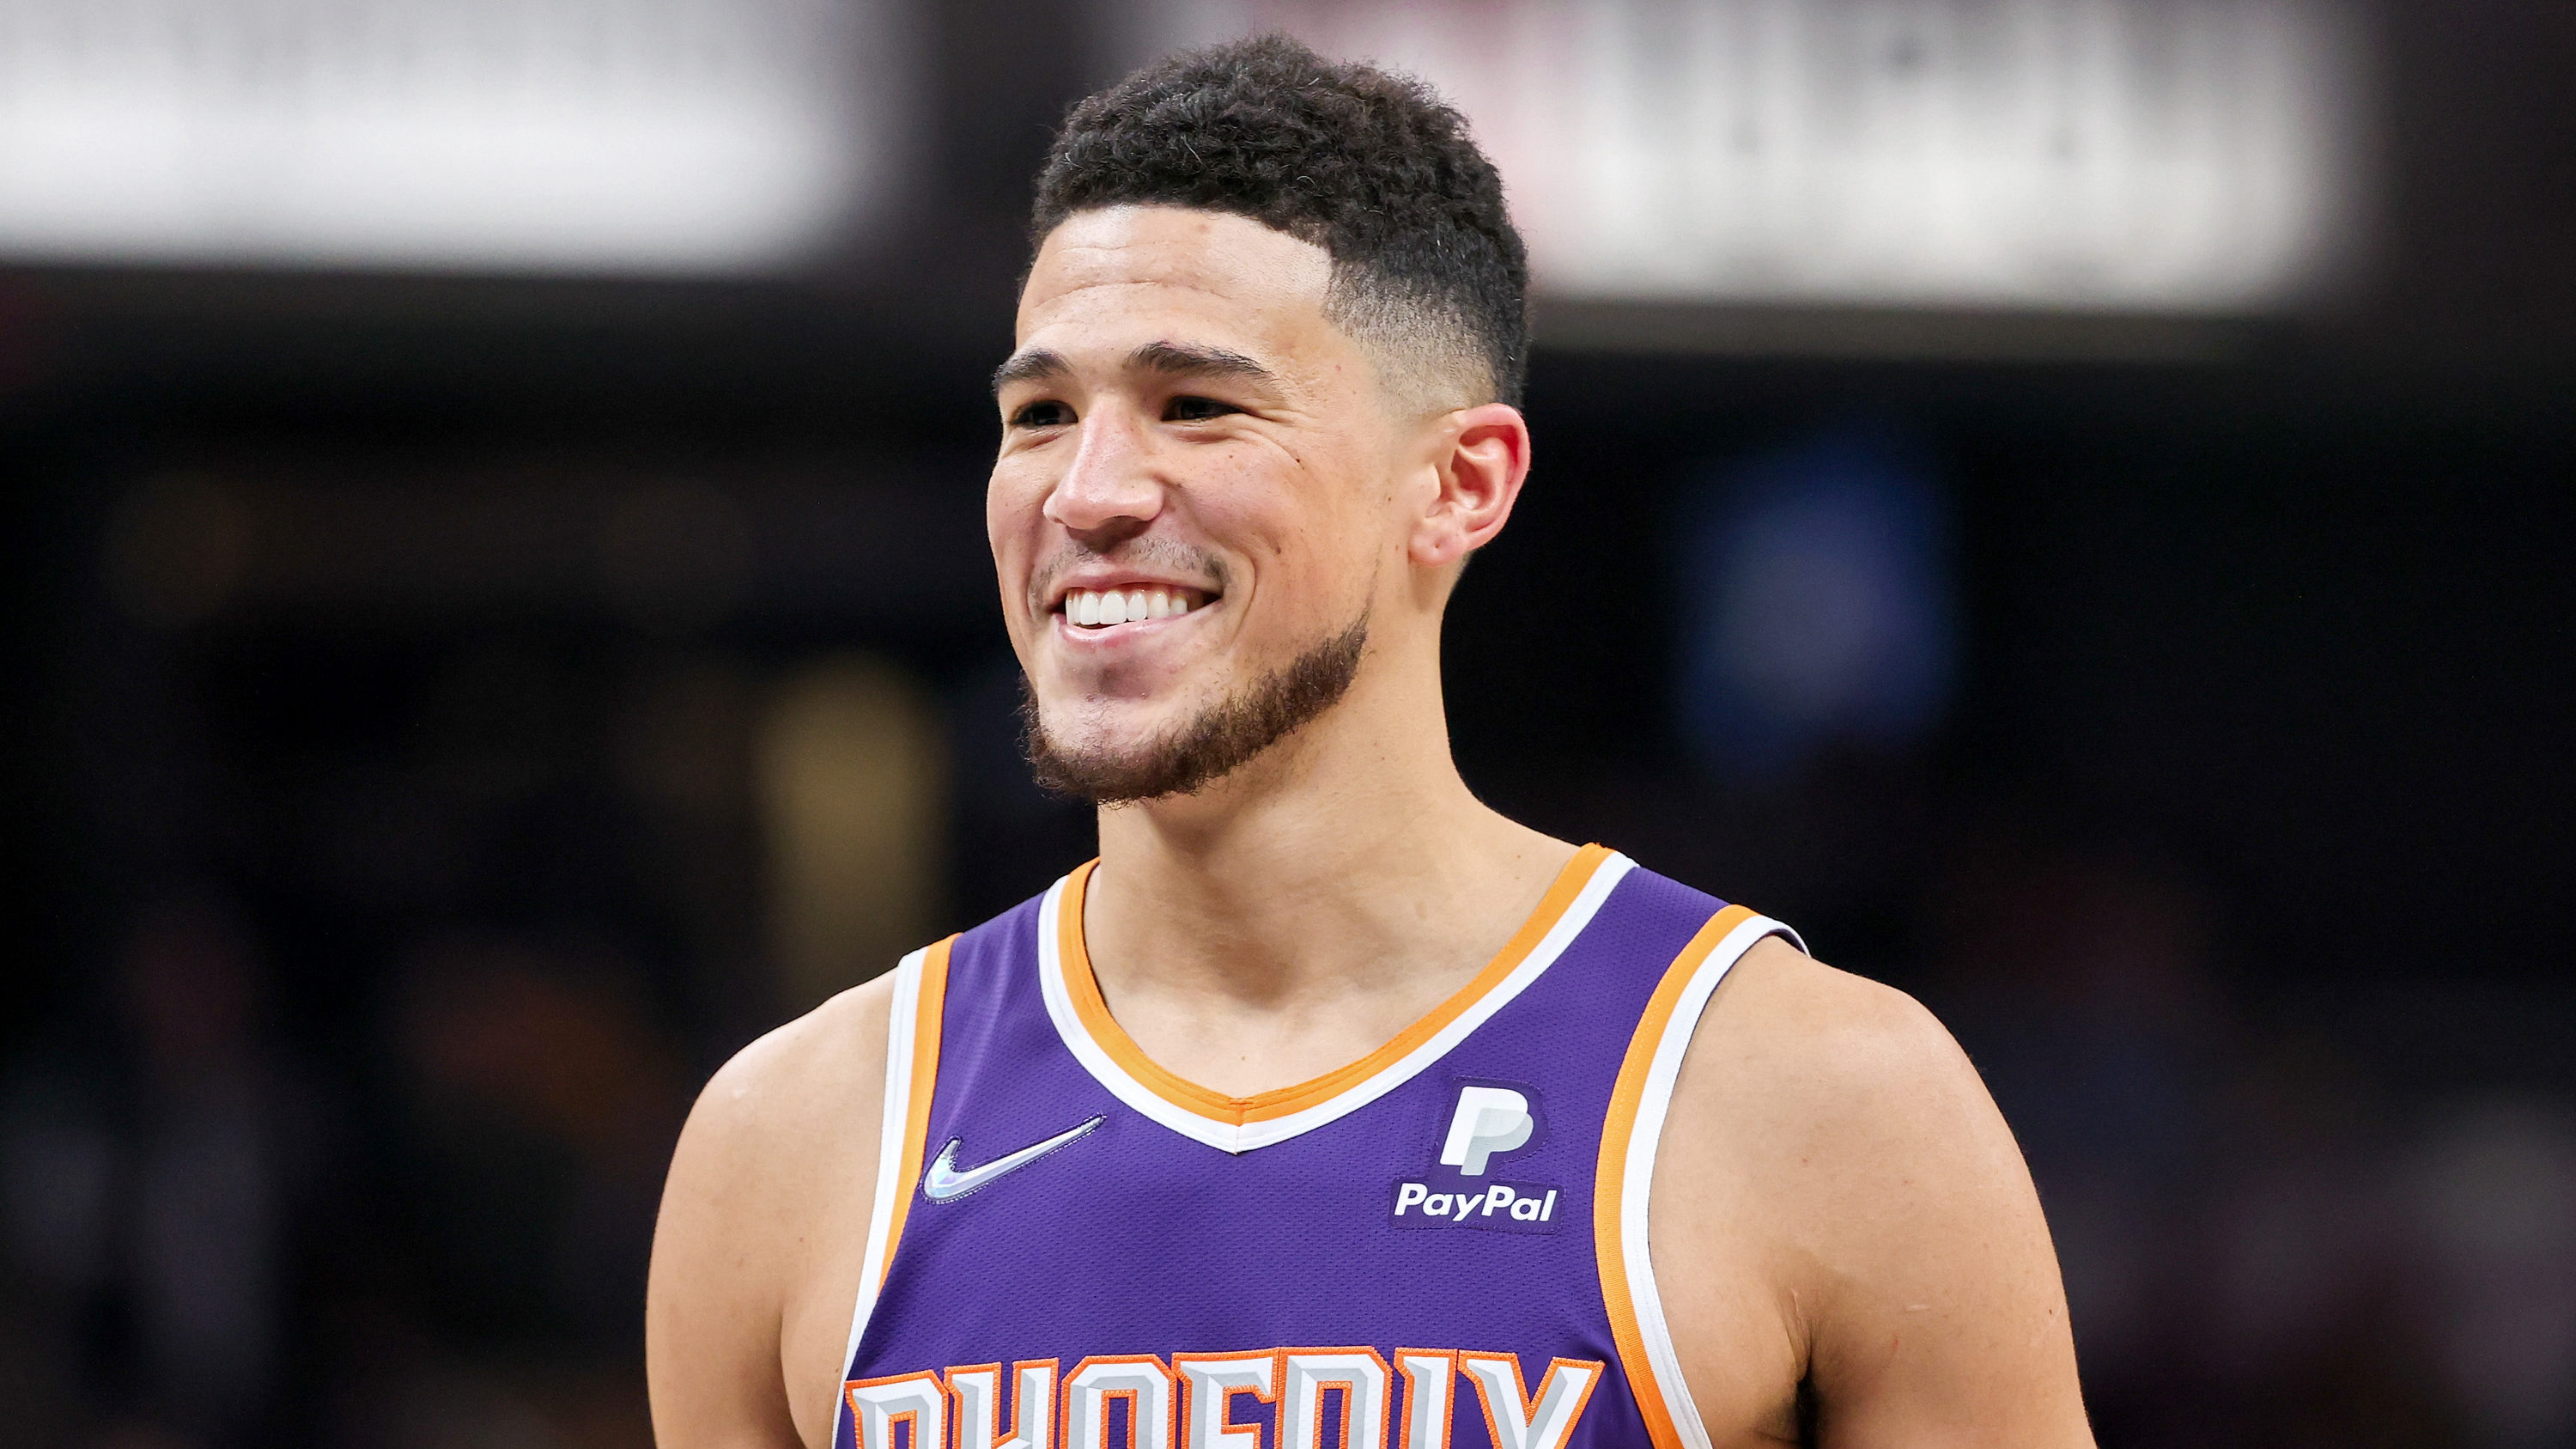 EXCLUSIVE: Devin Booker Extends Contract With Nike - Boardroom